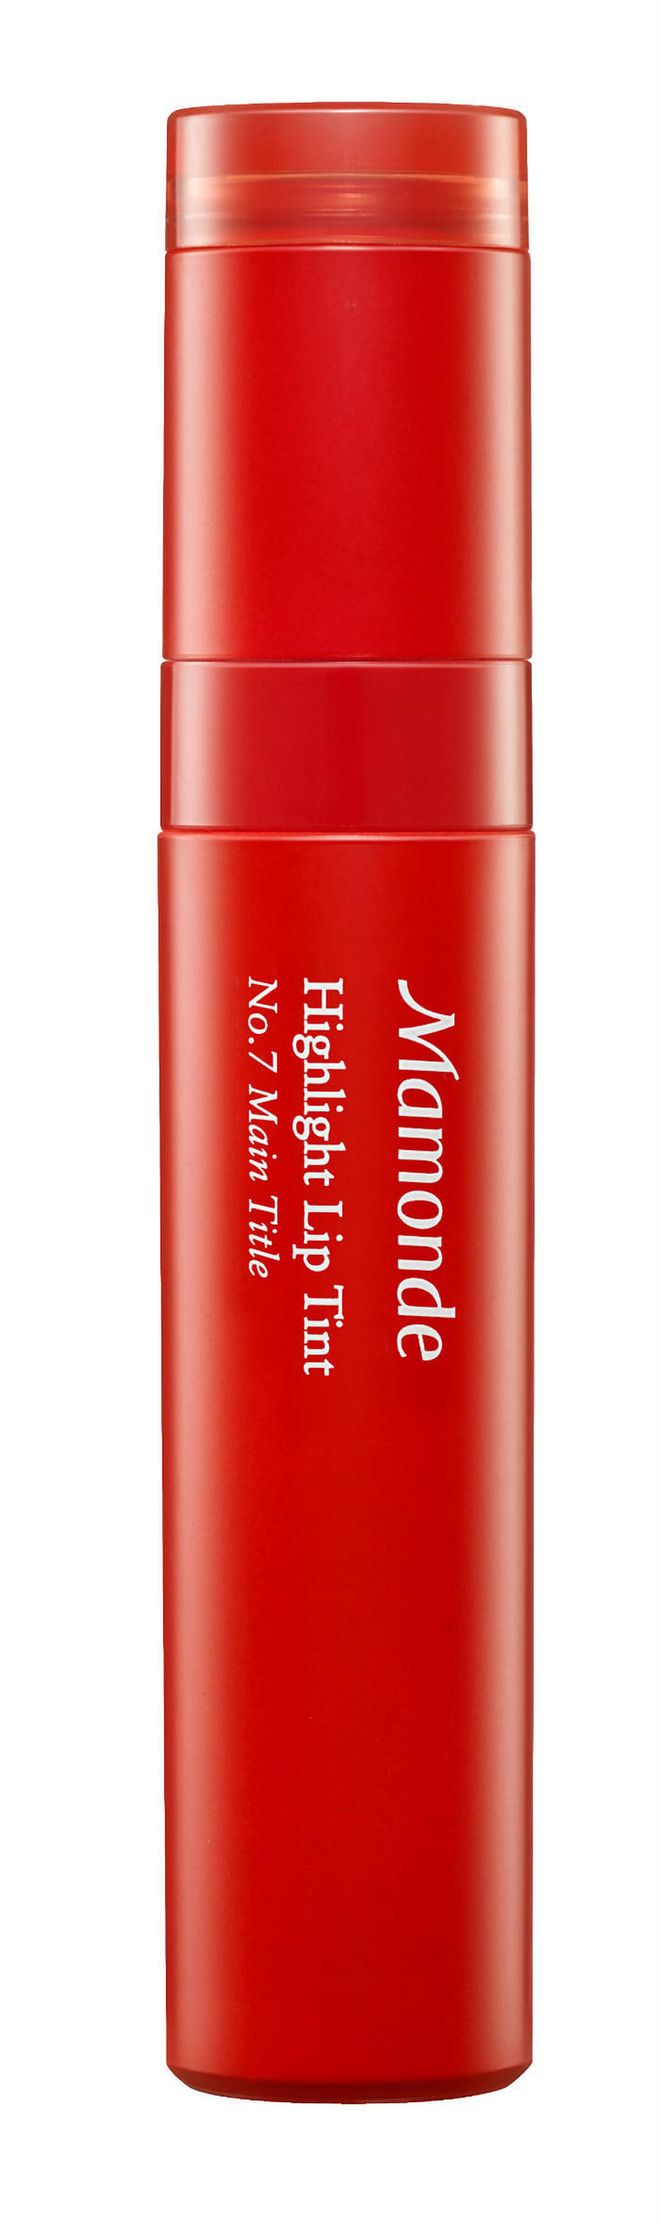 The product that launched a thousand (and more) sales, the Highlight Lip Tint was made famous by A-list Korean actress, Park Shi-Hye when she first swiped the lip tint on TV. Available in 10 shades, the tint is highly pigmented and extremely nourishing, so it's clear to see why customers keep coming back for more. (Photo: Mamonde) 